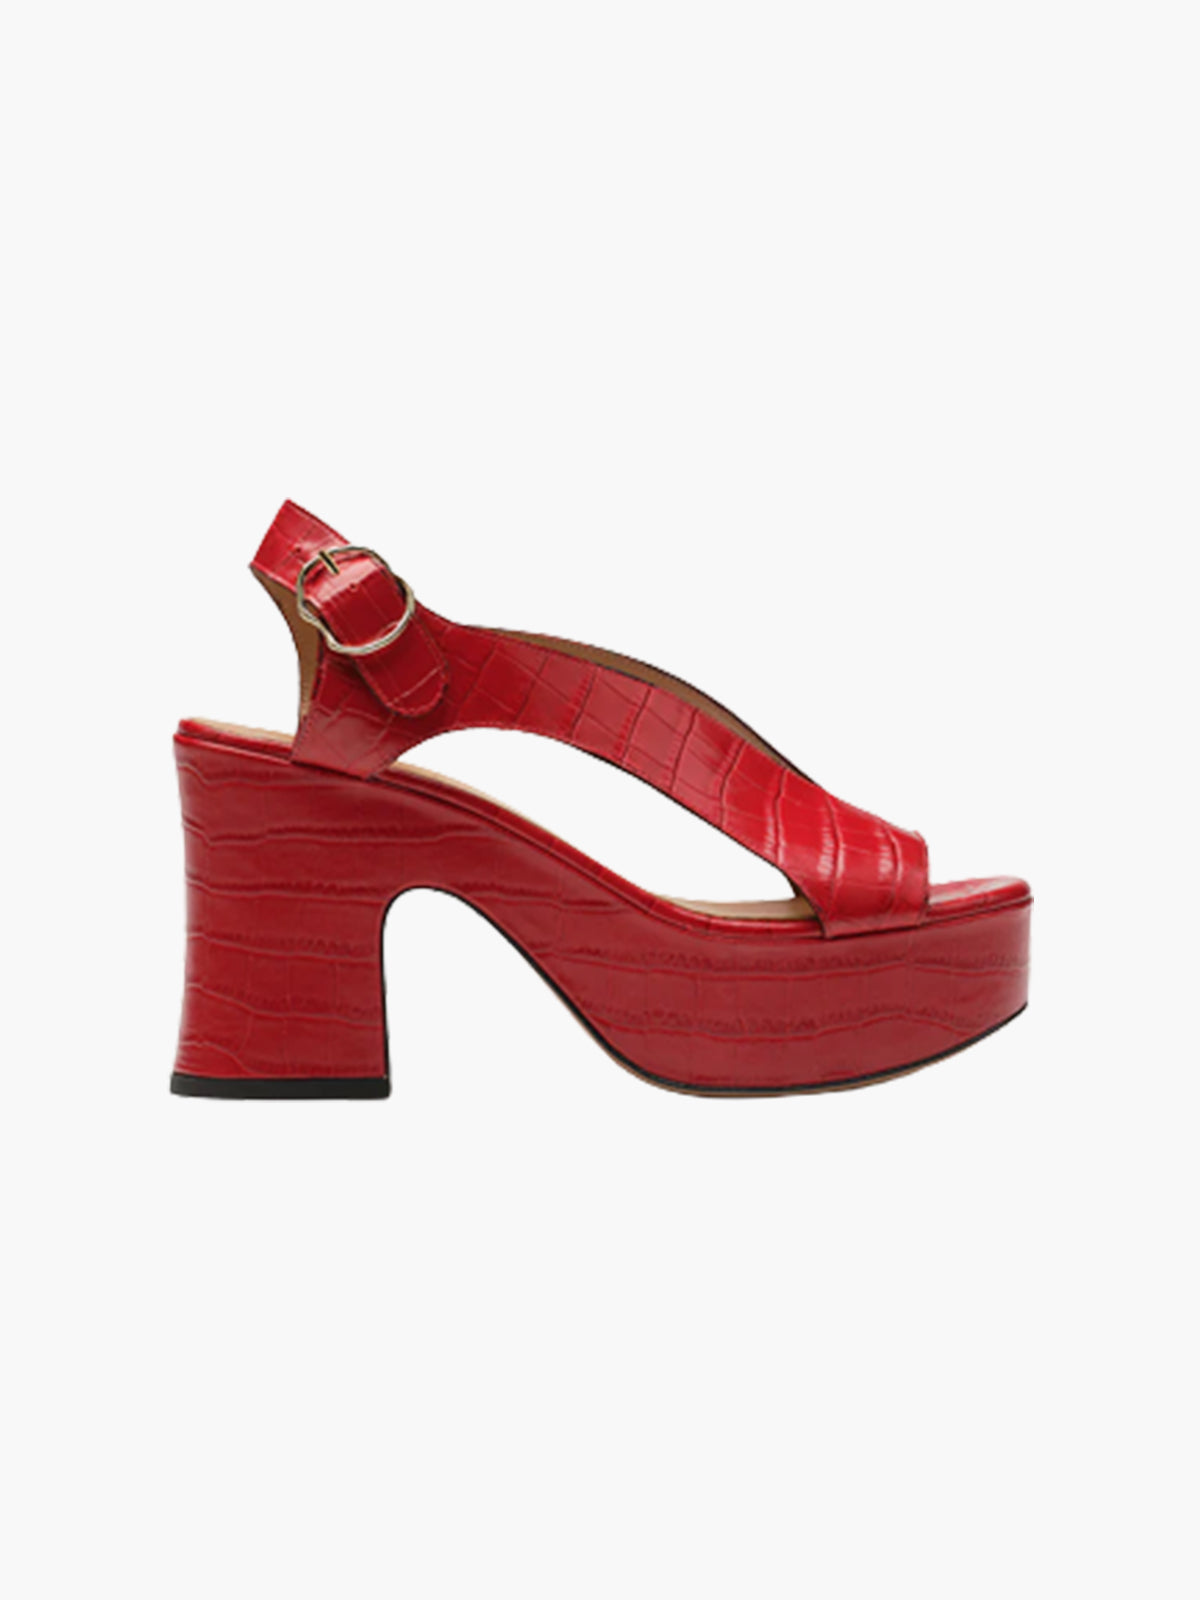 Taxi Sandals | Red Embossed Taxi Sandals | Red Embossed